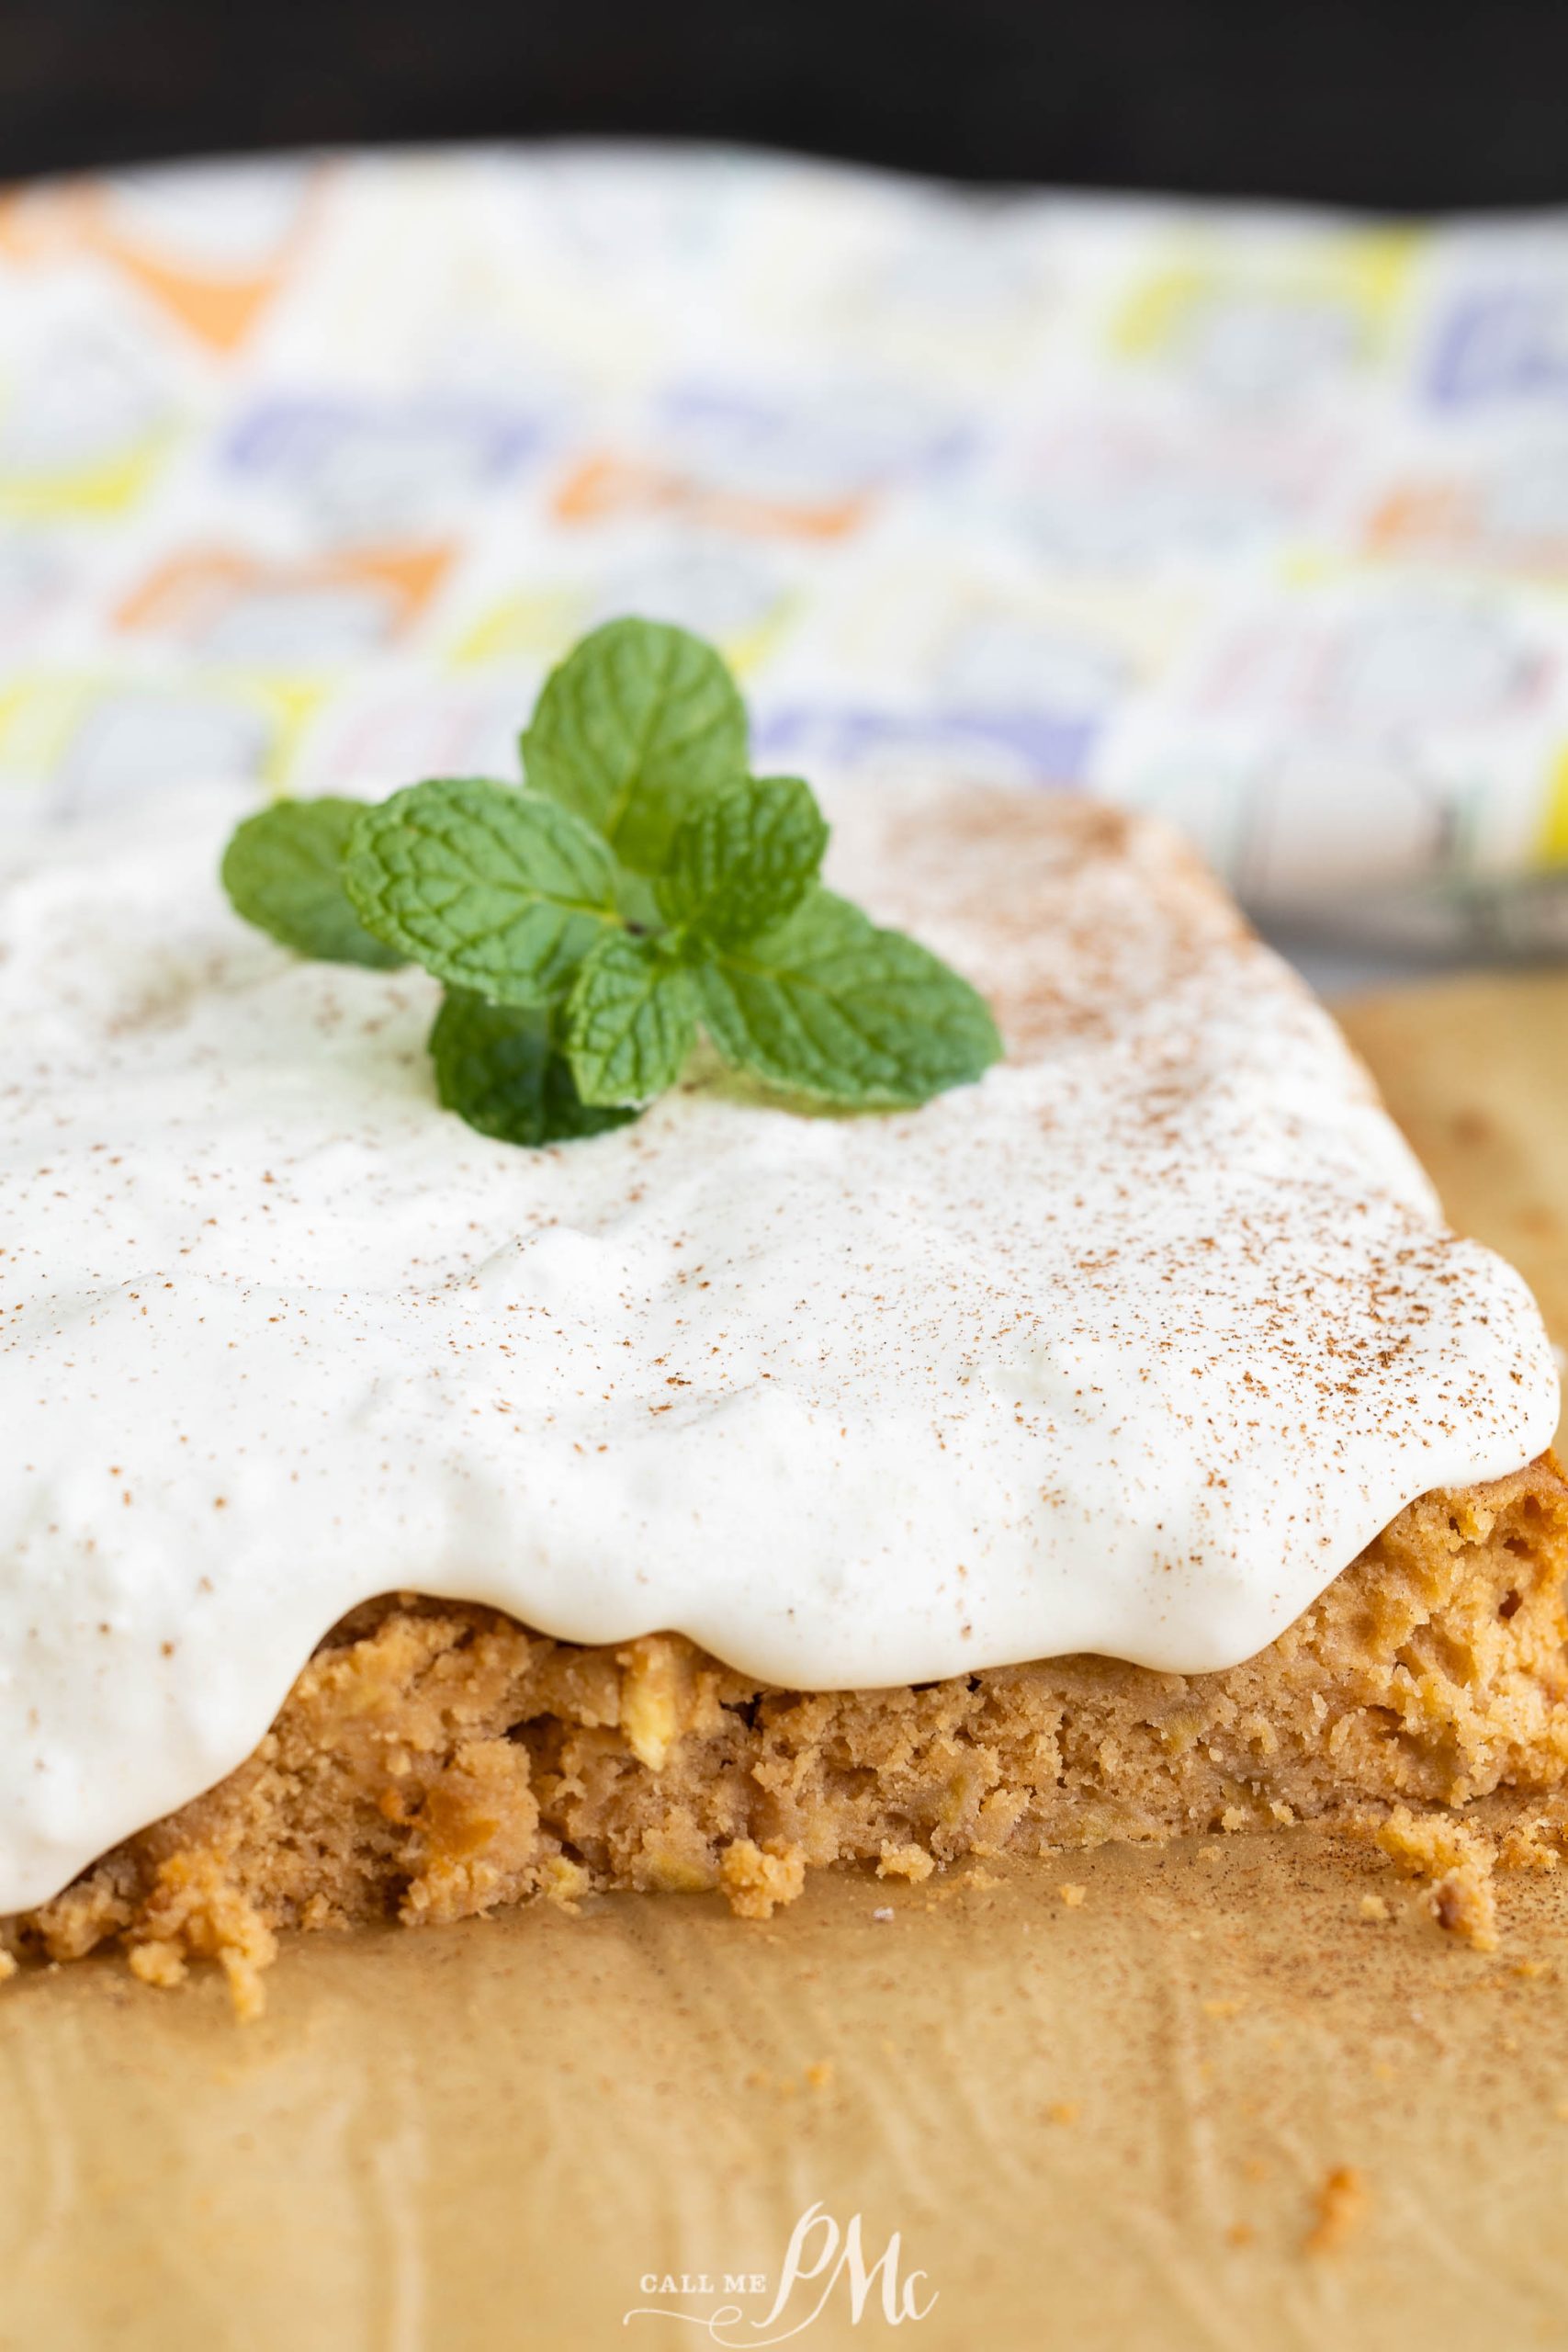 A slice of pumpkin cake with whipped cream and mint leaves.